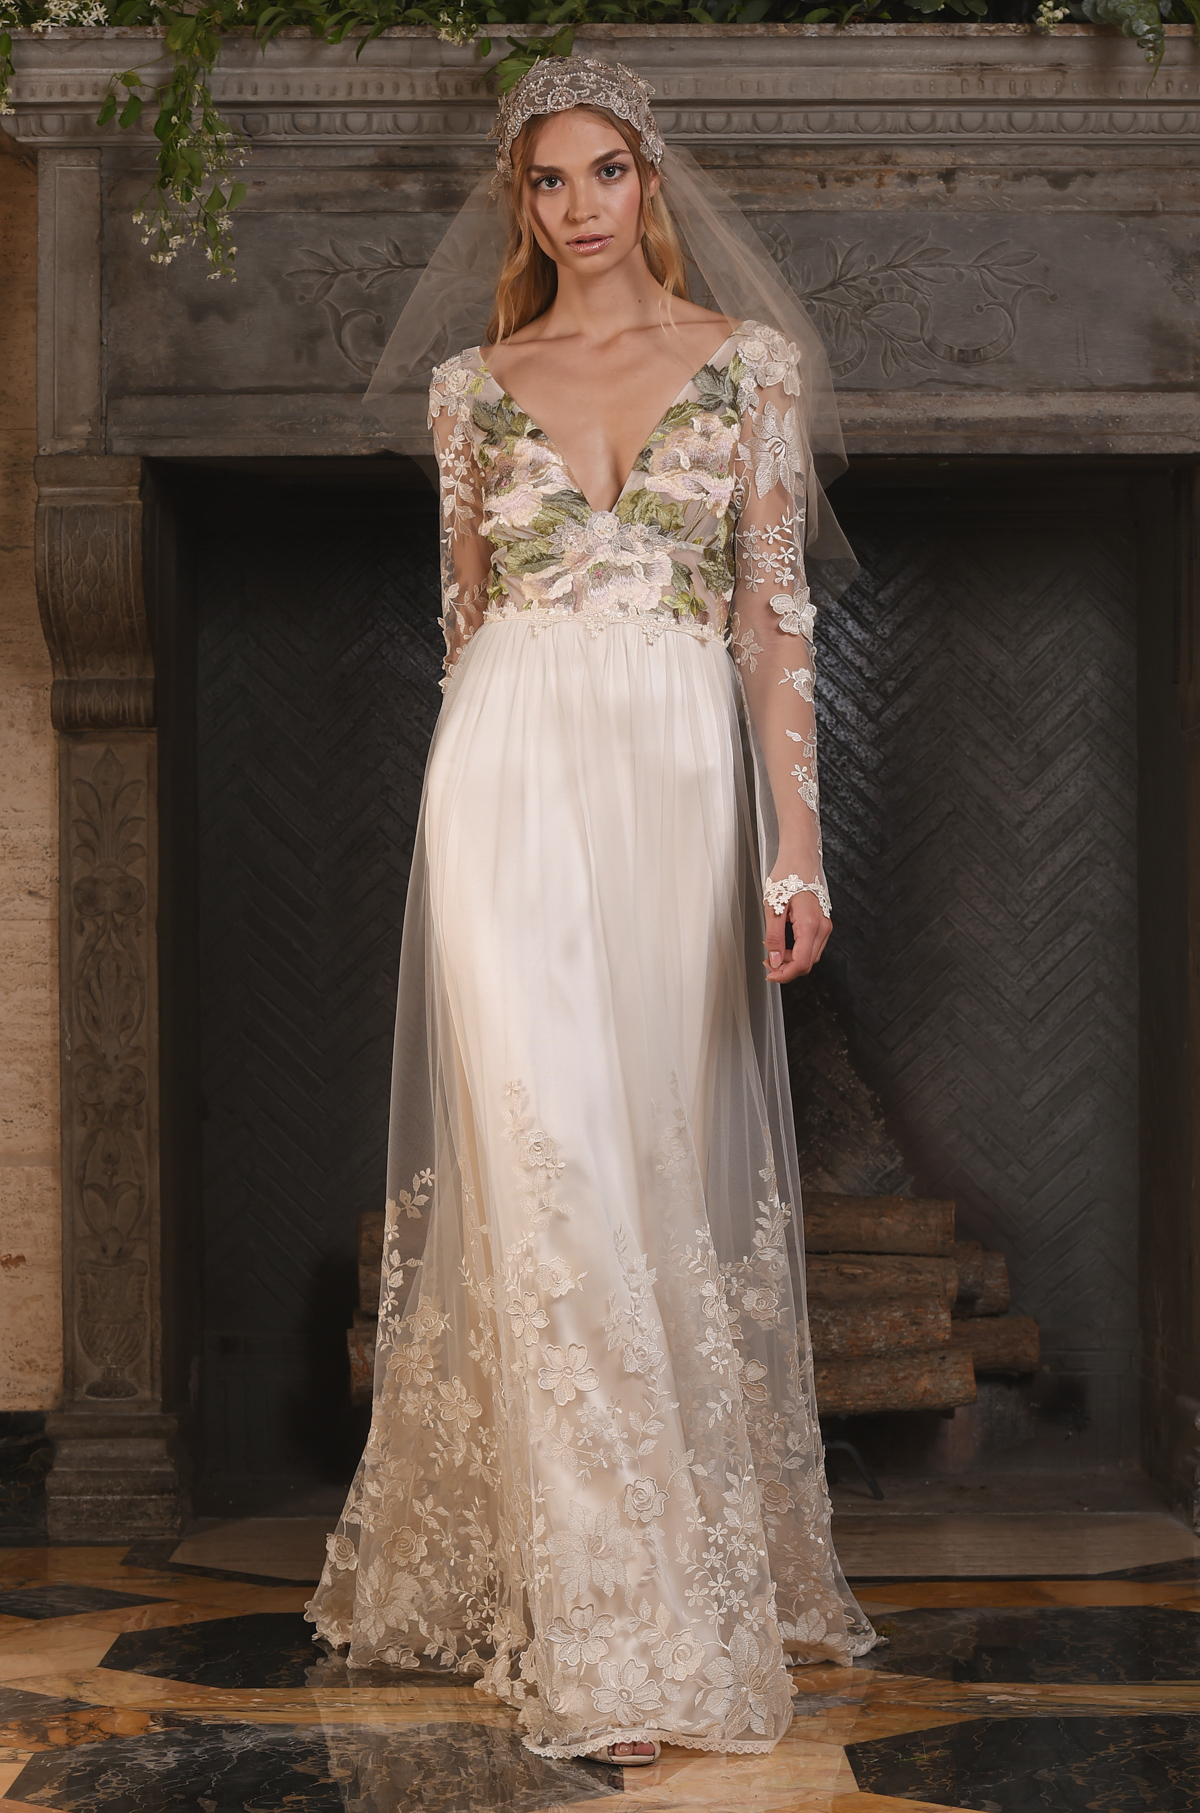 'The Four Seasons' - a new couture bridal fashion collection for 2017 by Claire Pettibone.